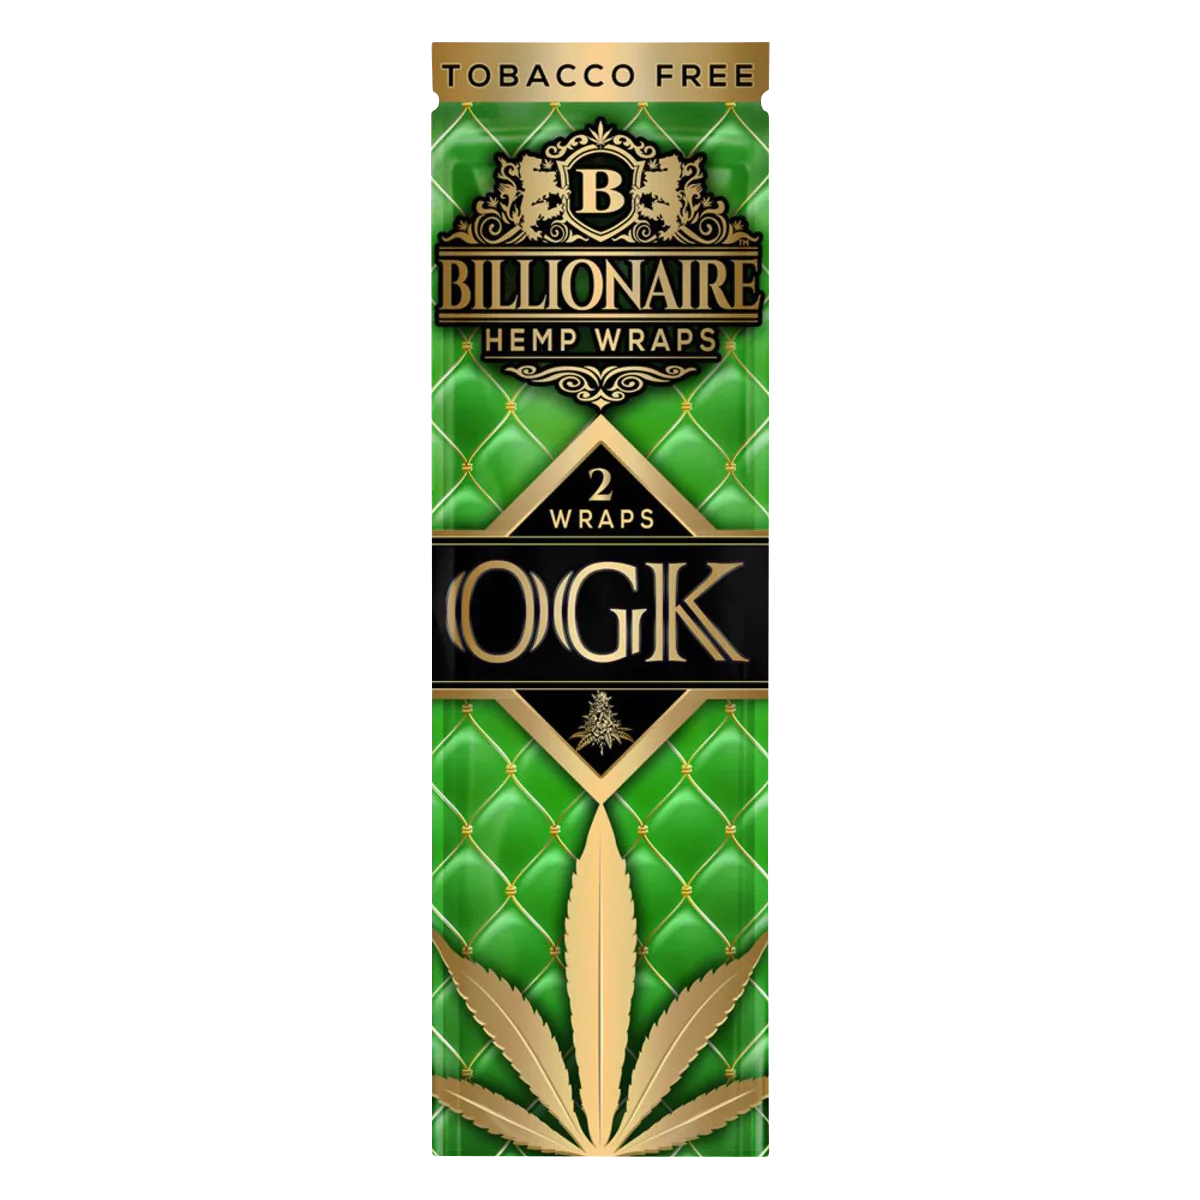 Billionaire Hemp Wraps OGK flavor, 25 pack front view, tobacco-free blunt wraps for dry herbs